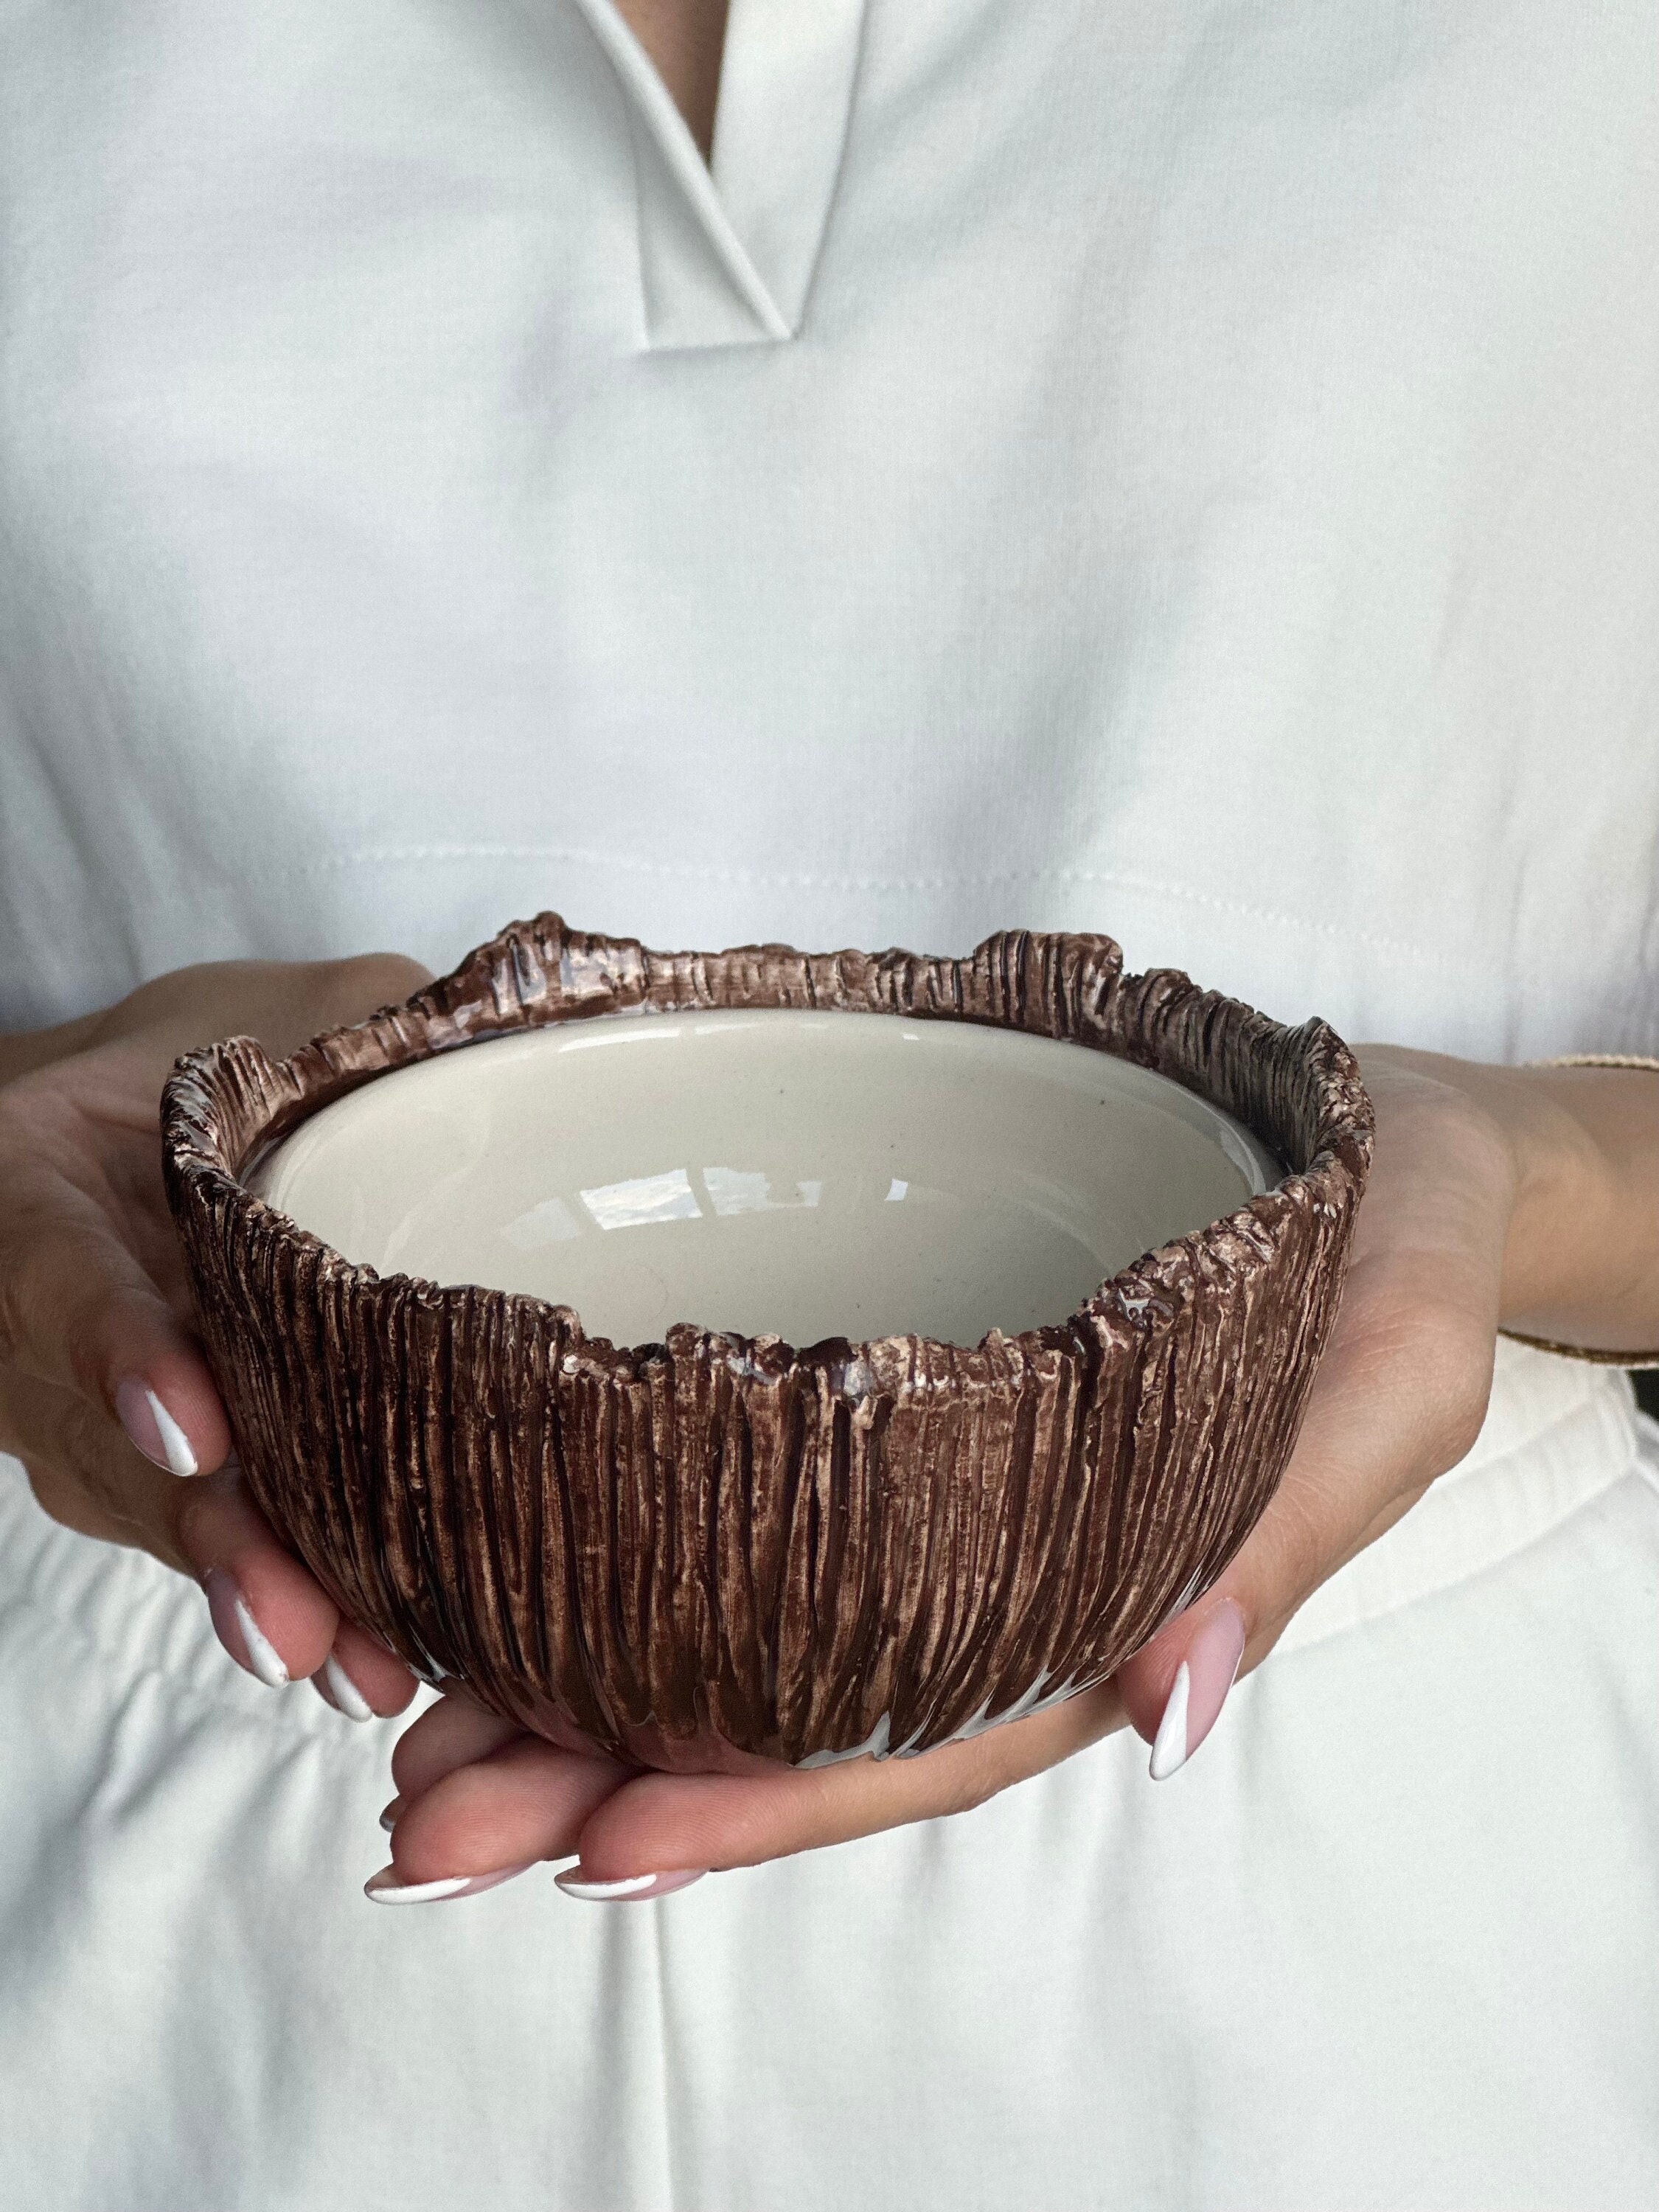 BarConic Real Coconut Cup - Lacquered Coconut Cup w/ Palm Tree Design - Lacquered